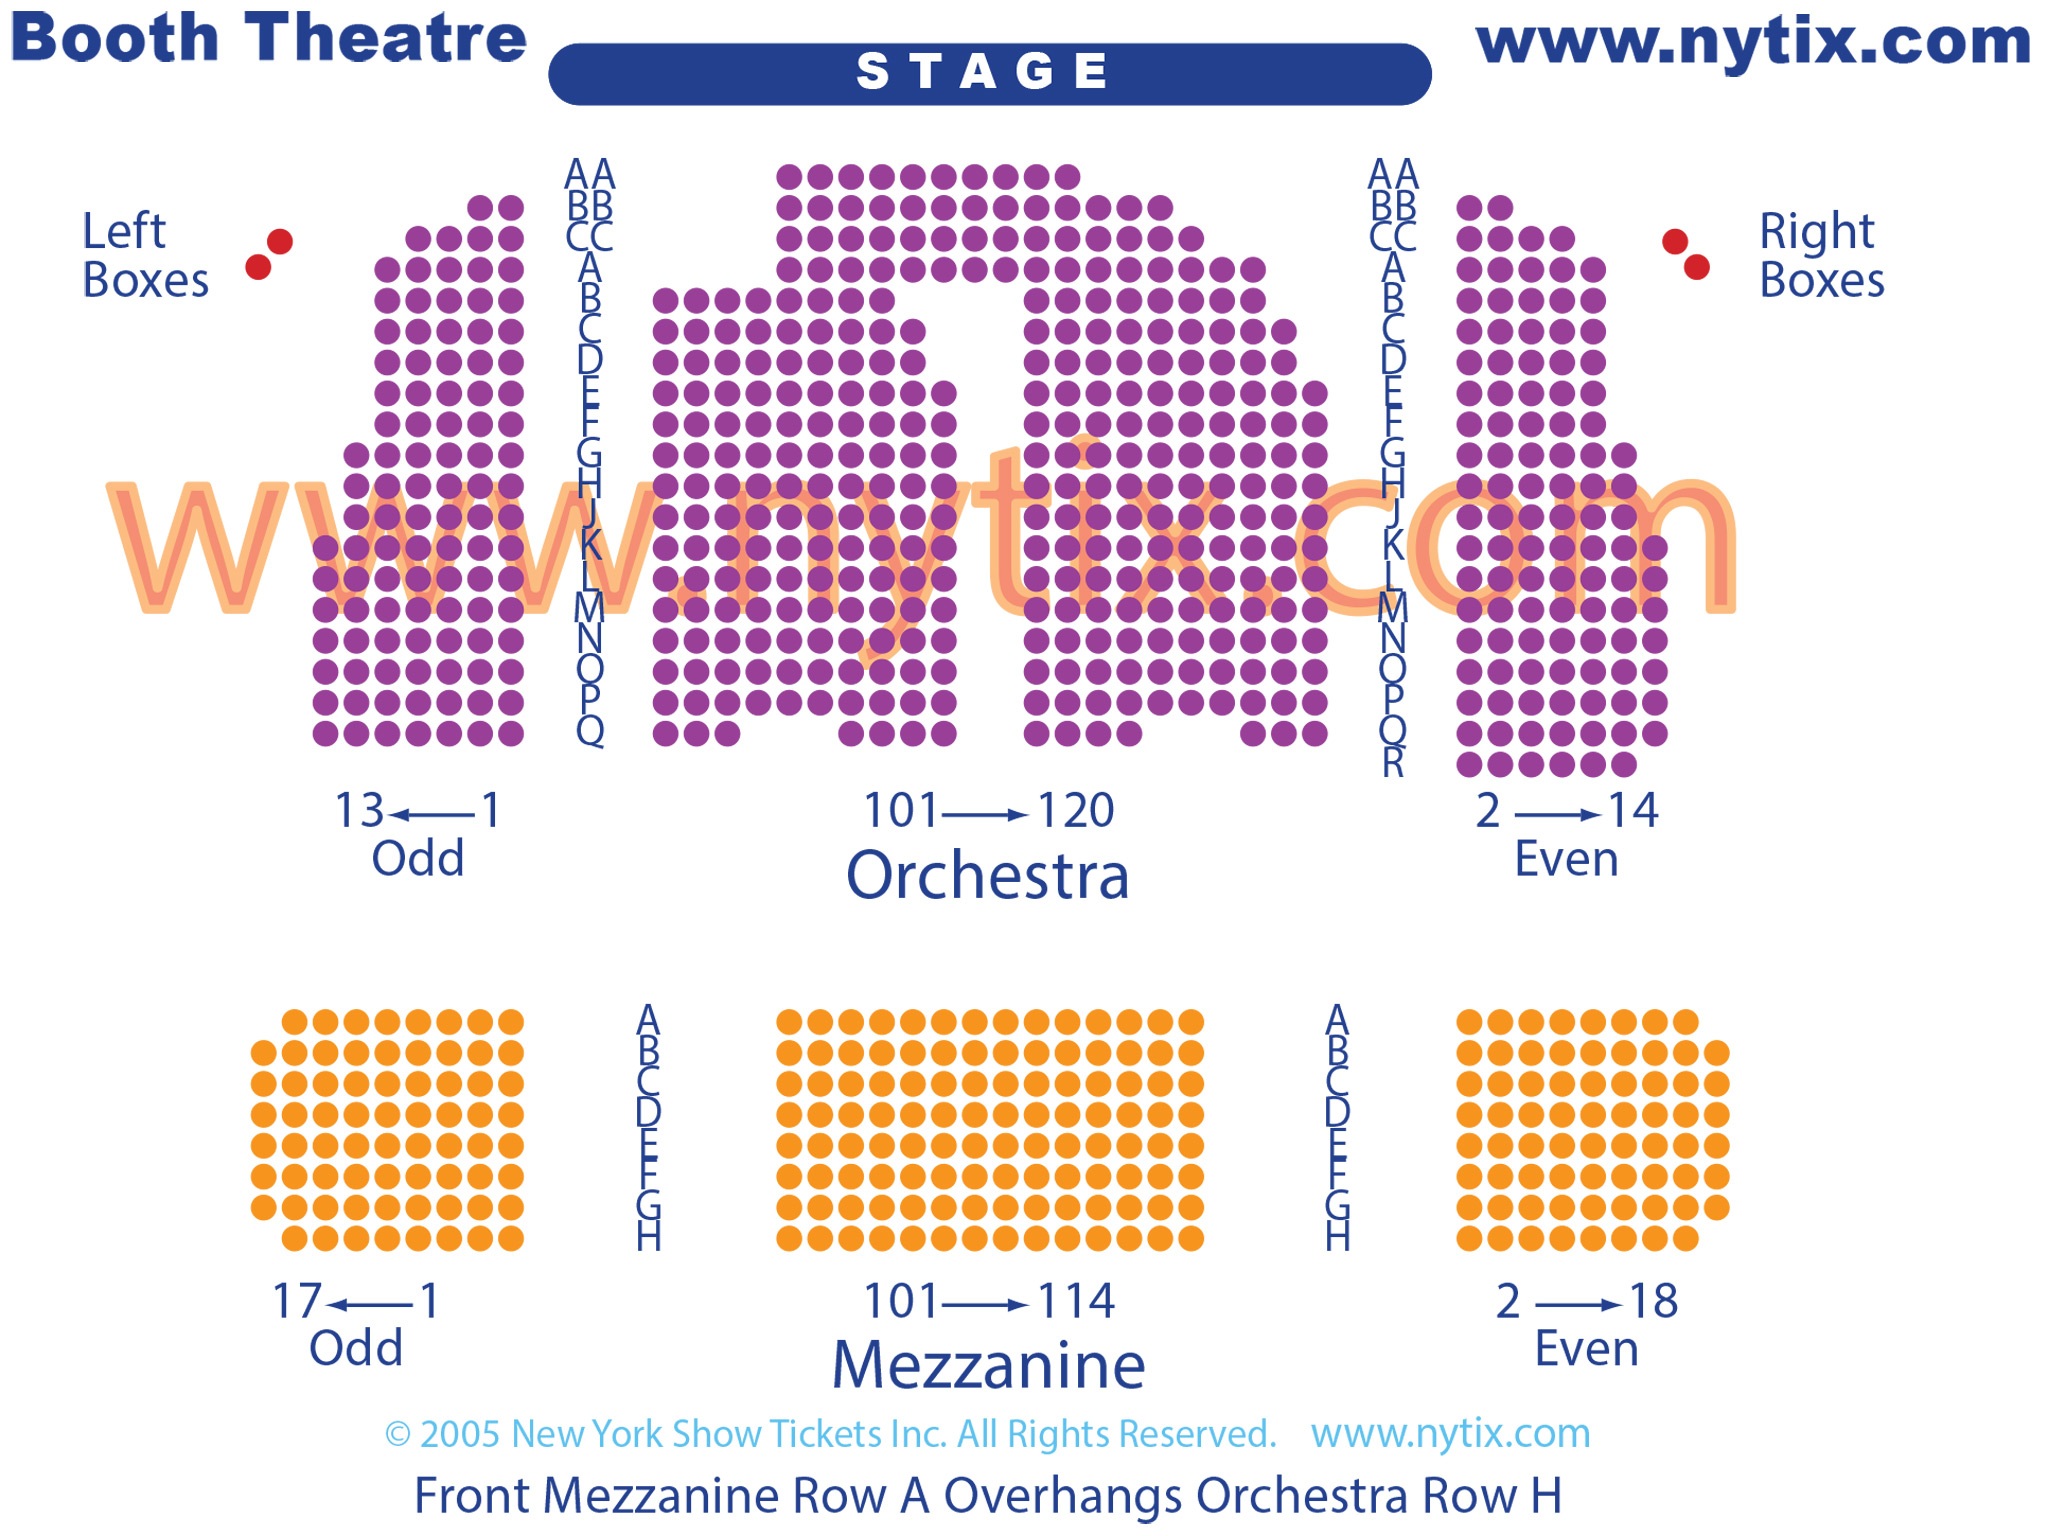 Booth Theater Nyc Seating Chart